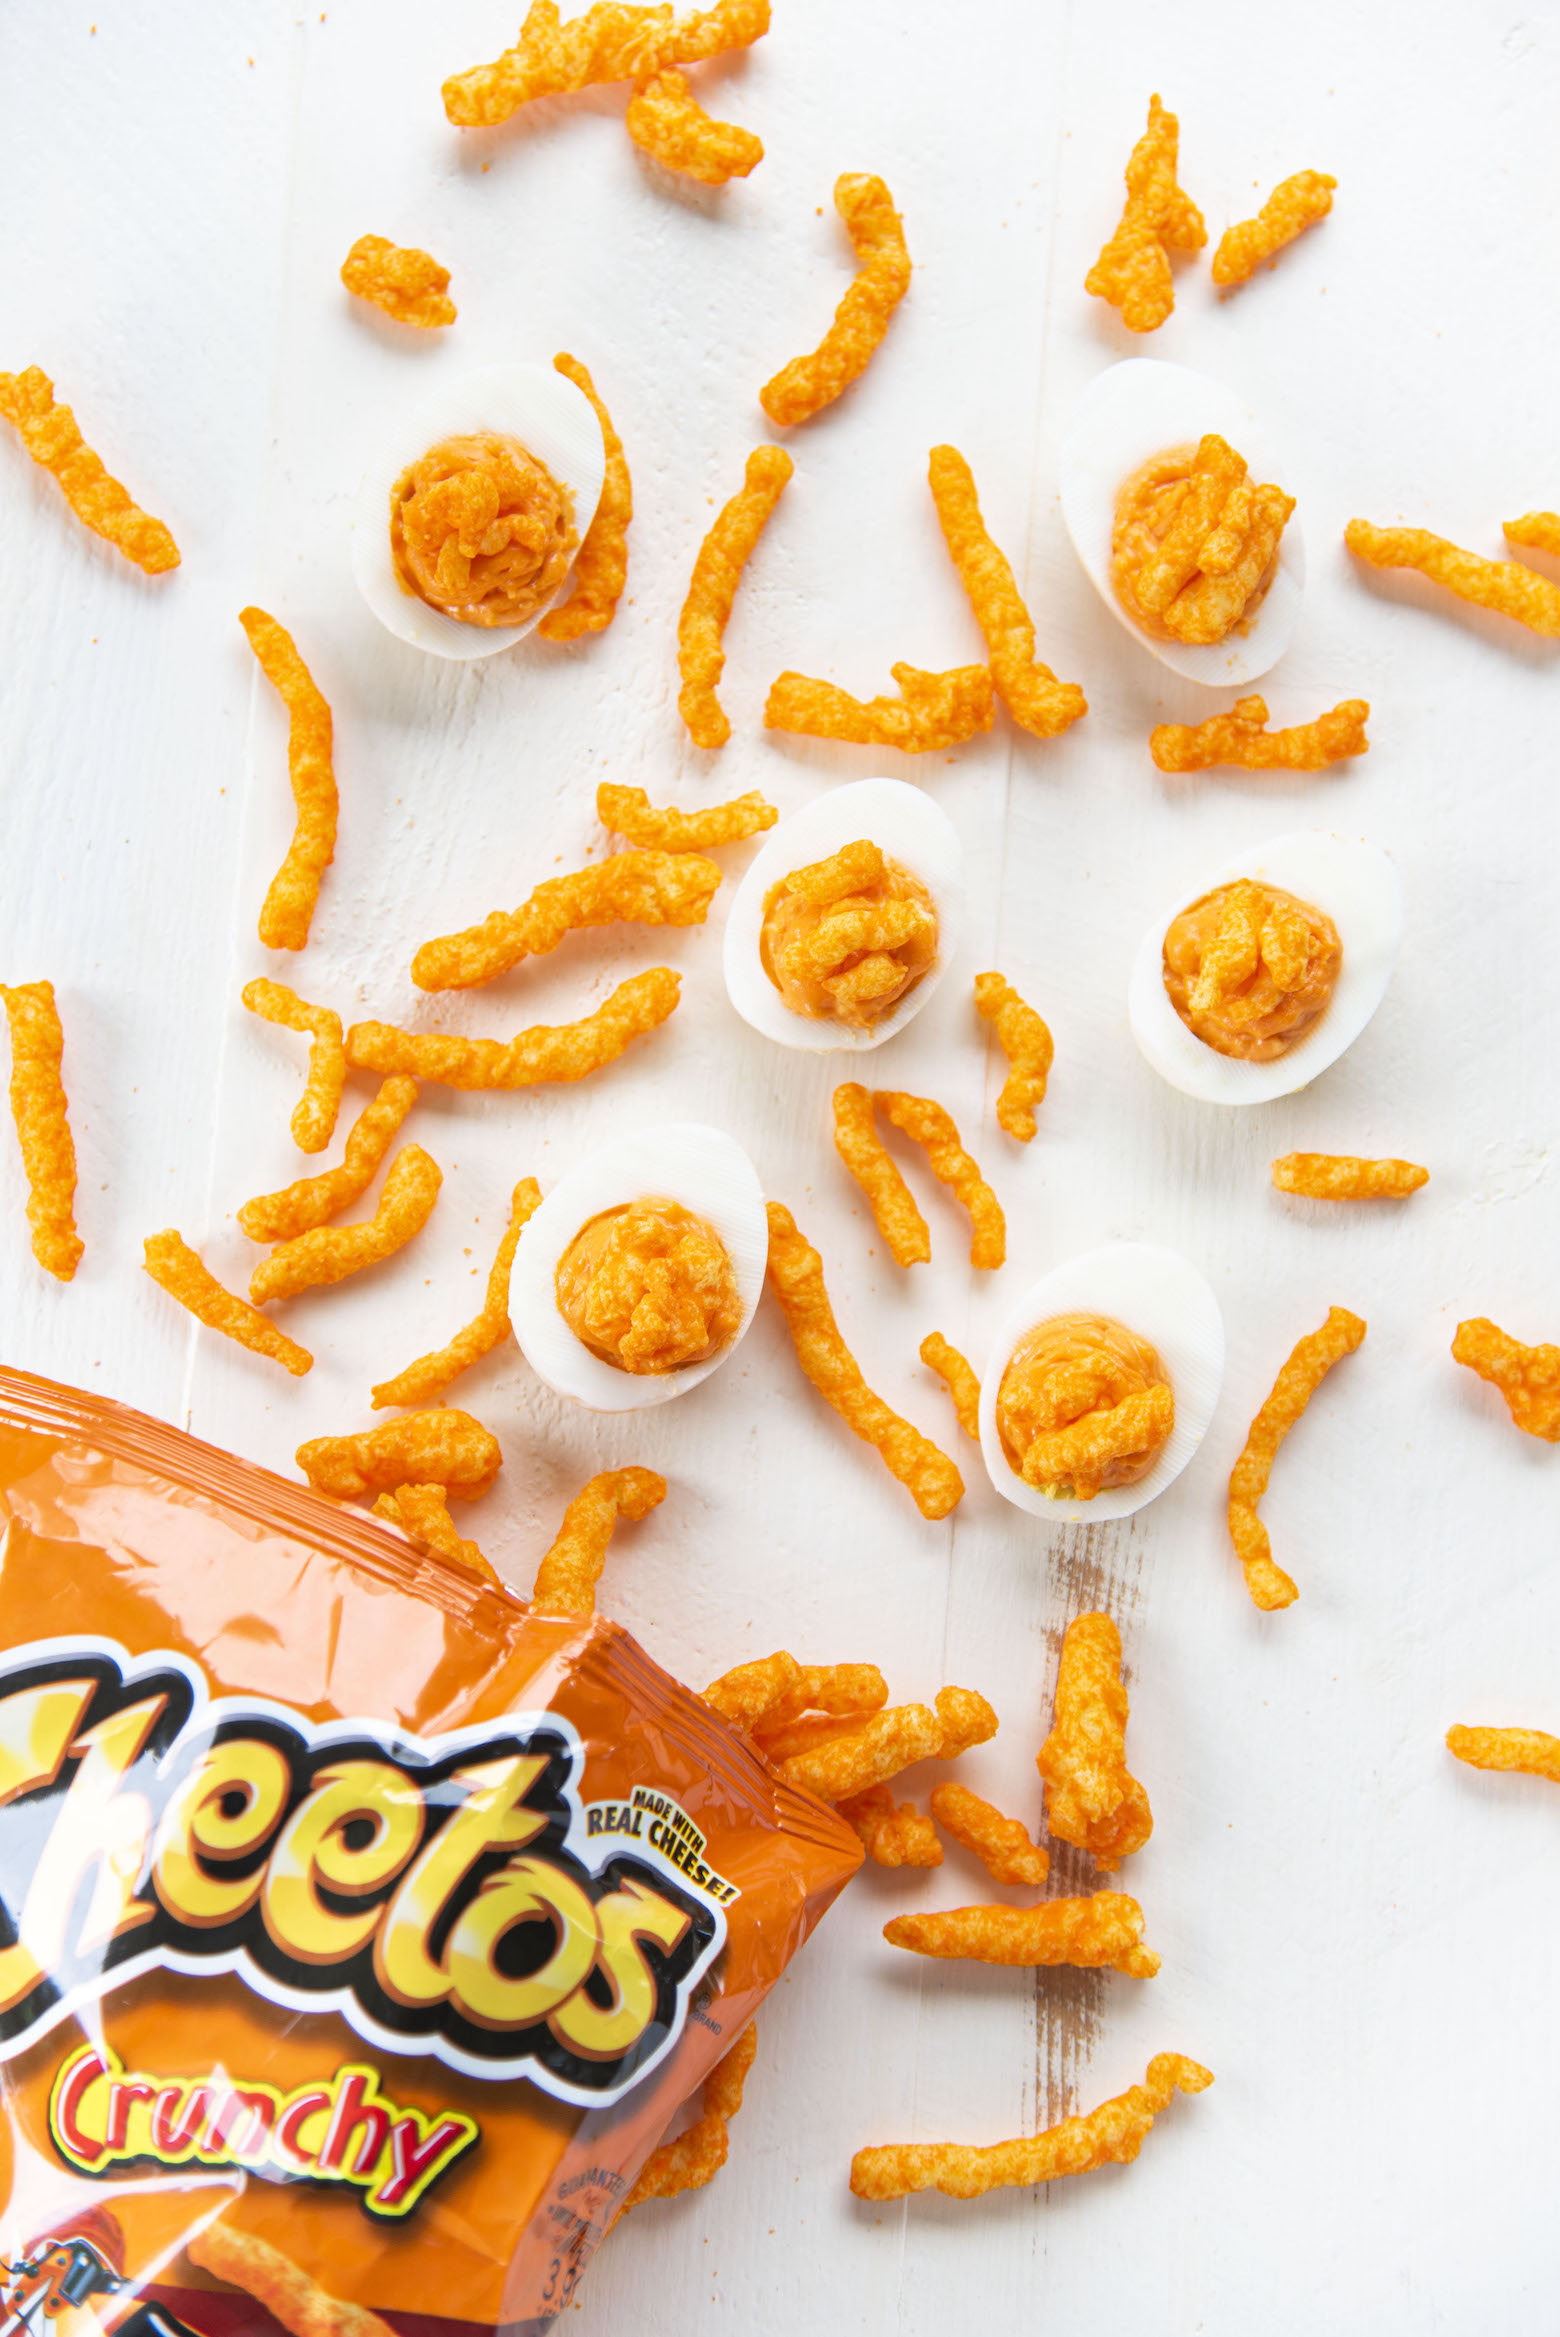 Cheetos Deviled Eggs coming out of Cheetos bag